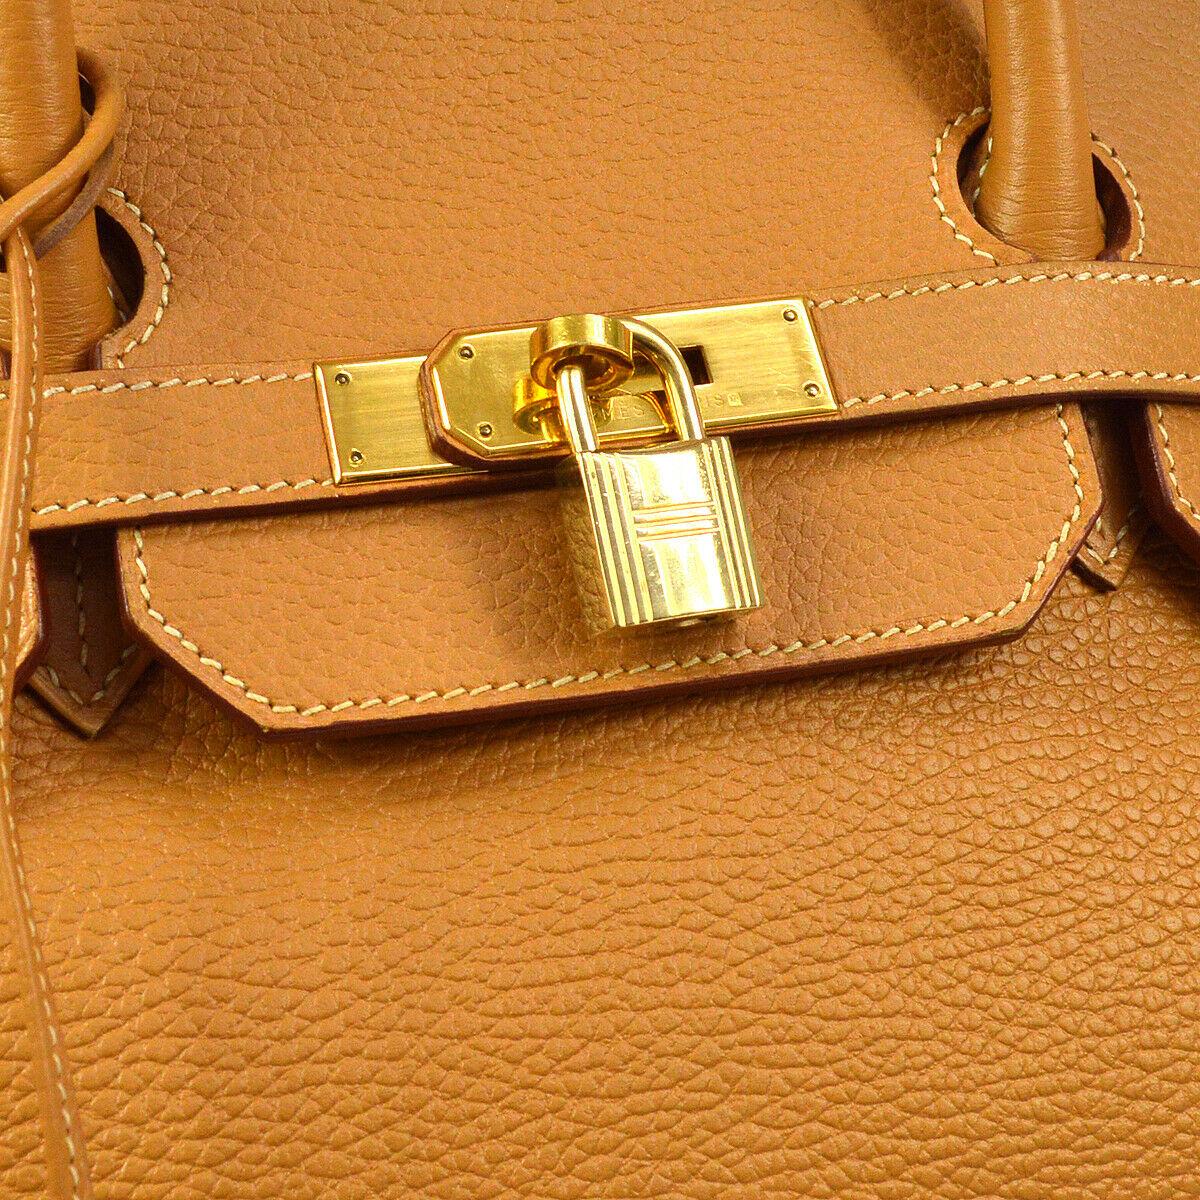 Hermes Birkin 40 Cognac Leather Gold Travel Carryall Top Handle Satchel Tote

Leather
Gold tone hardware
Leather lining
Date code present
Made in France
Handle drop 4.25